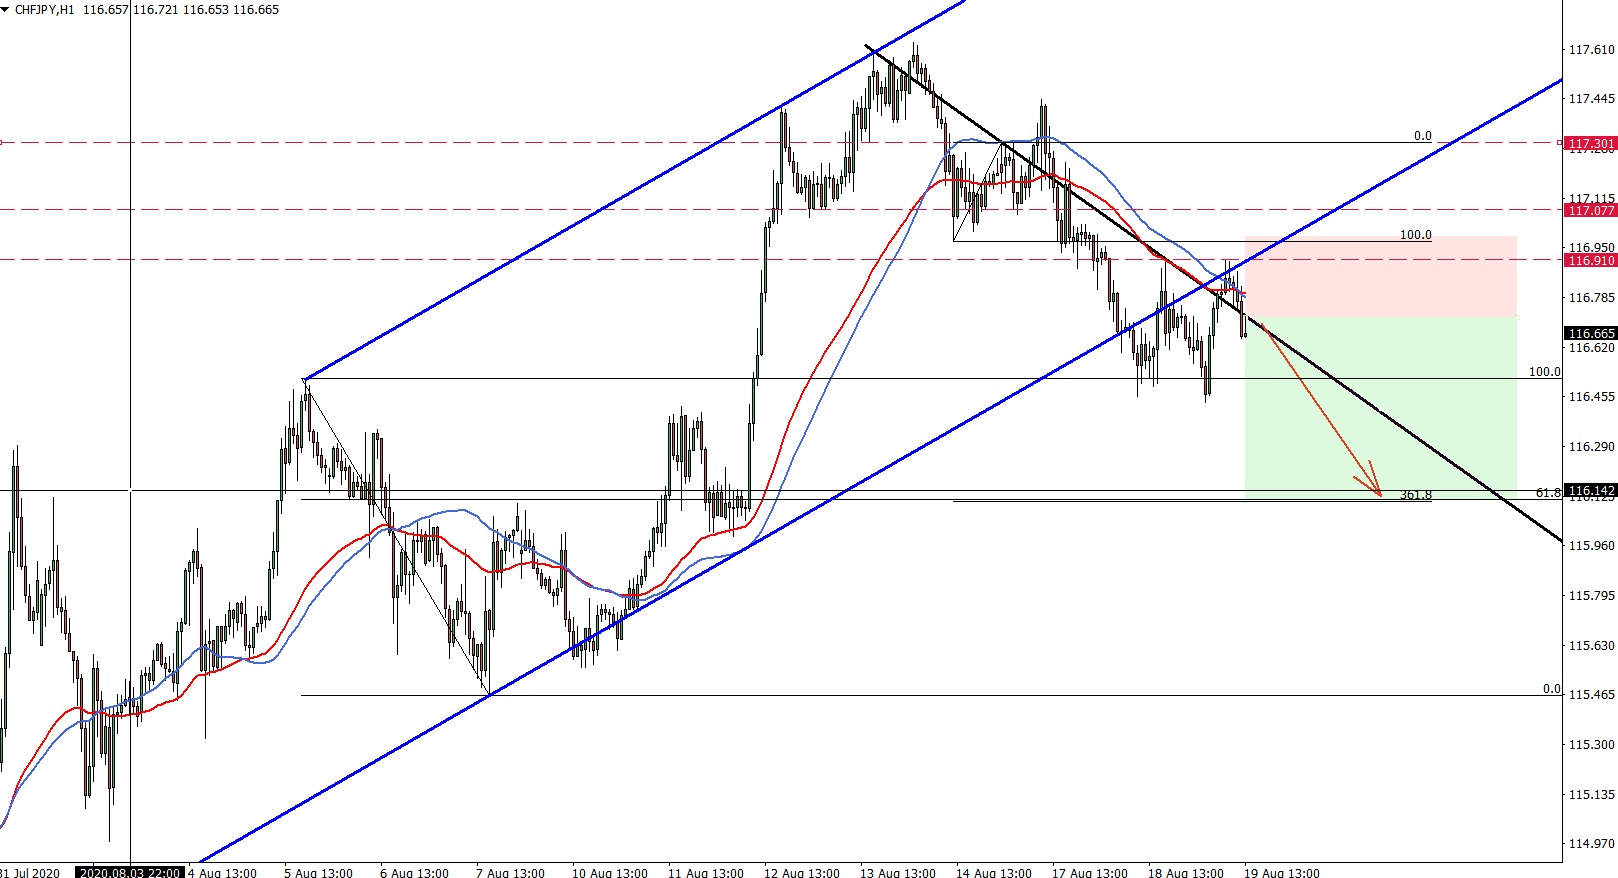 CHFJPY hourly chart August 19th 2020